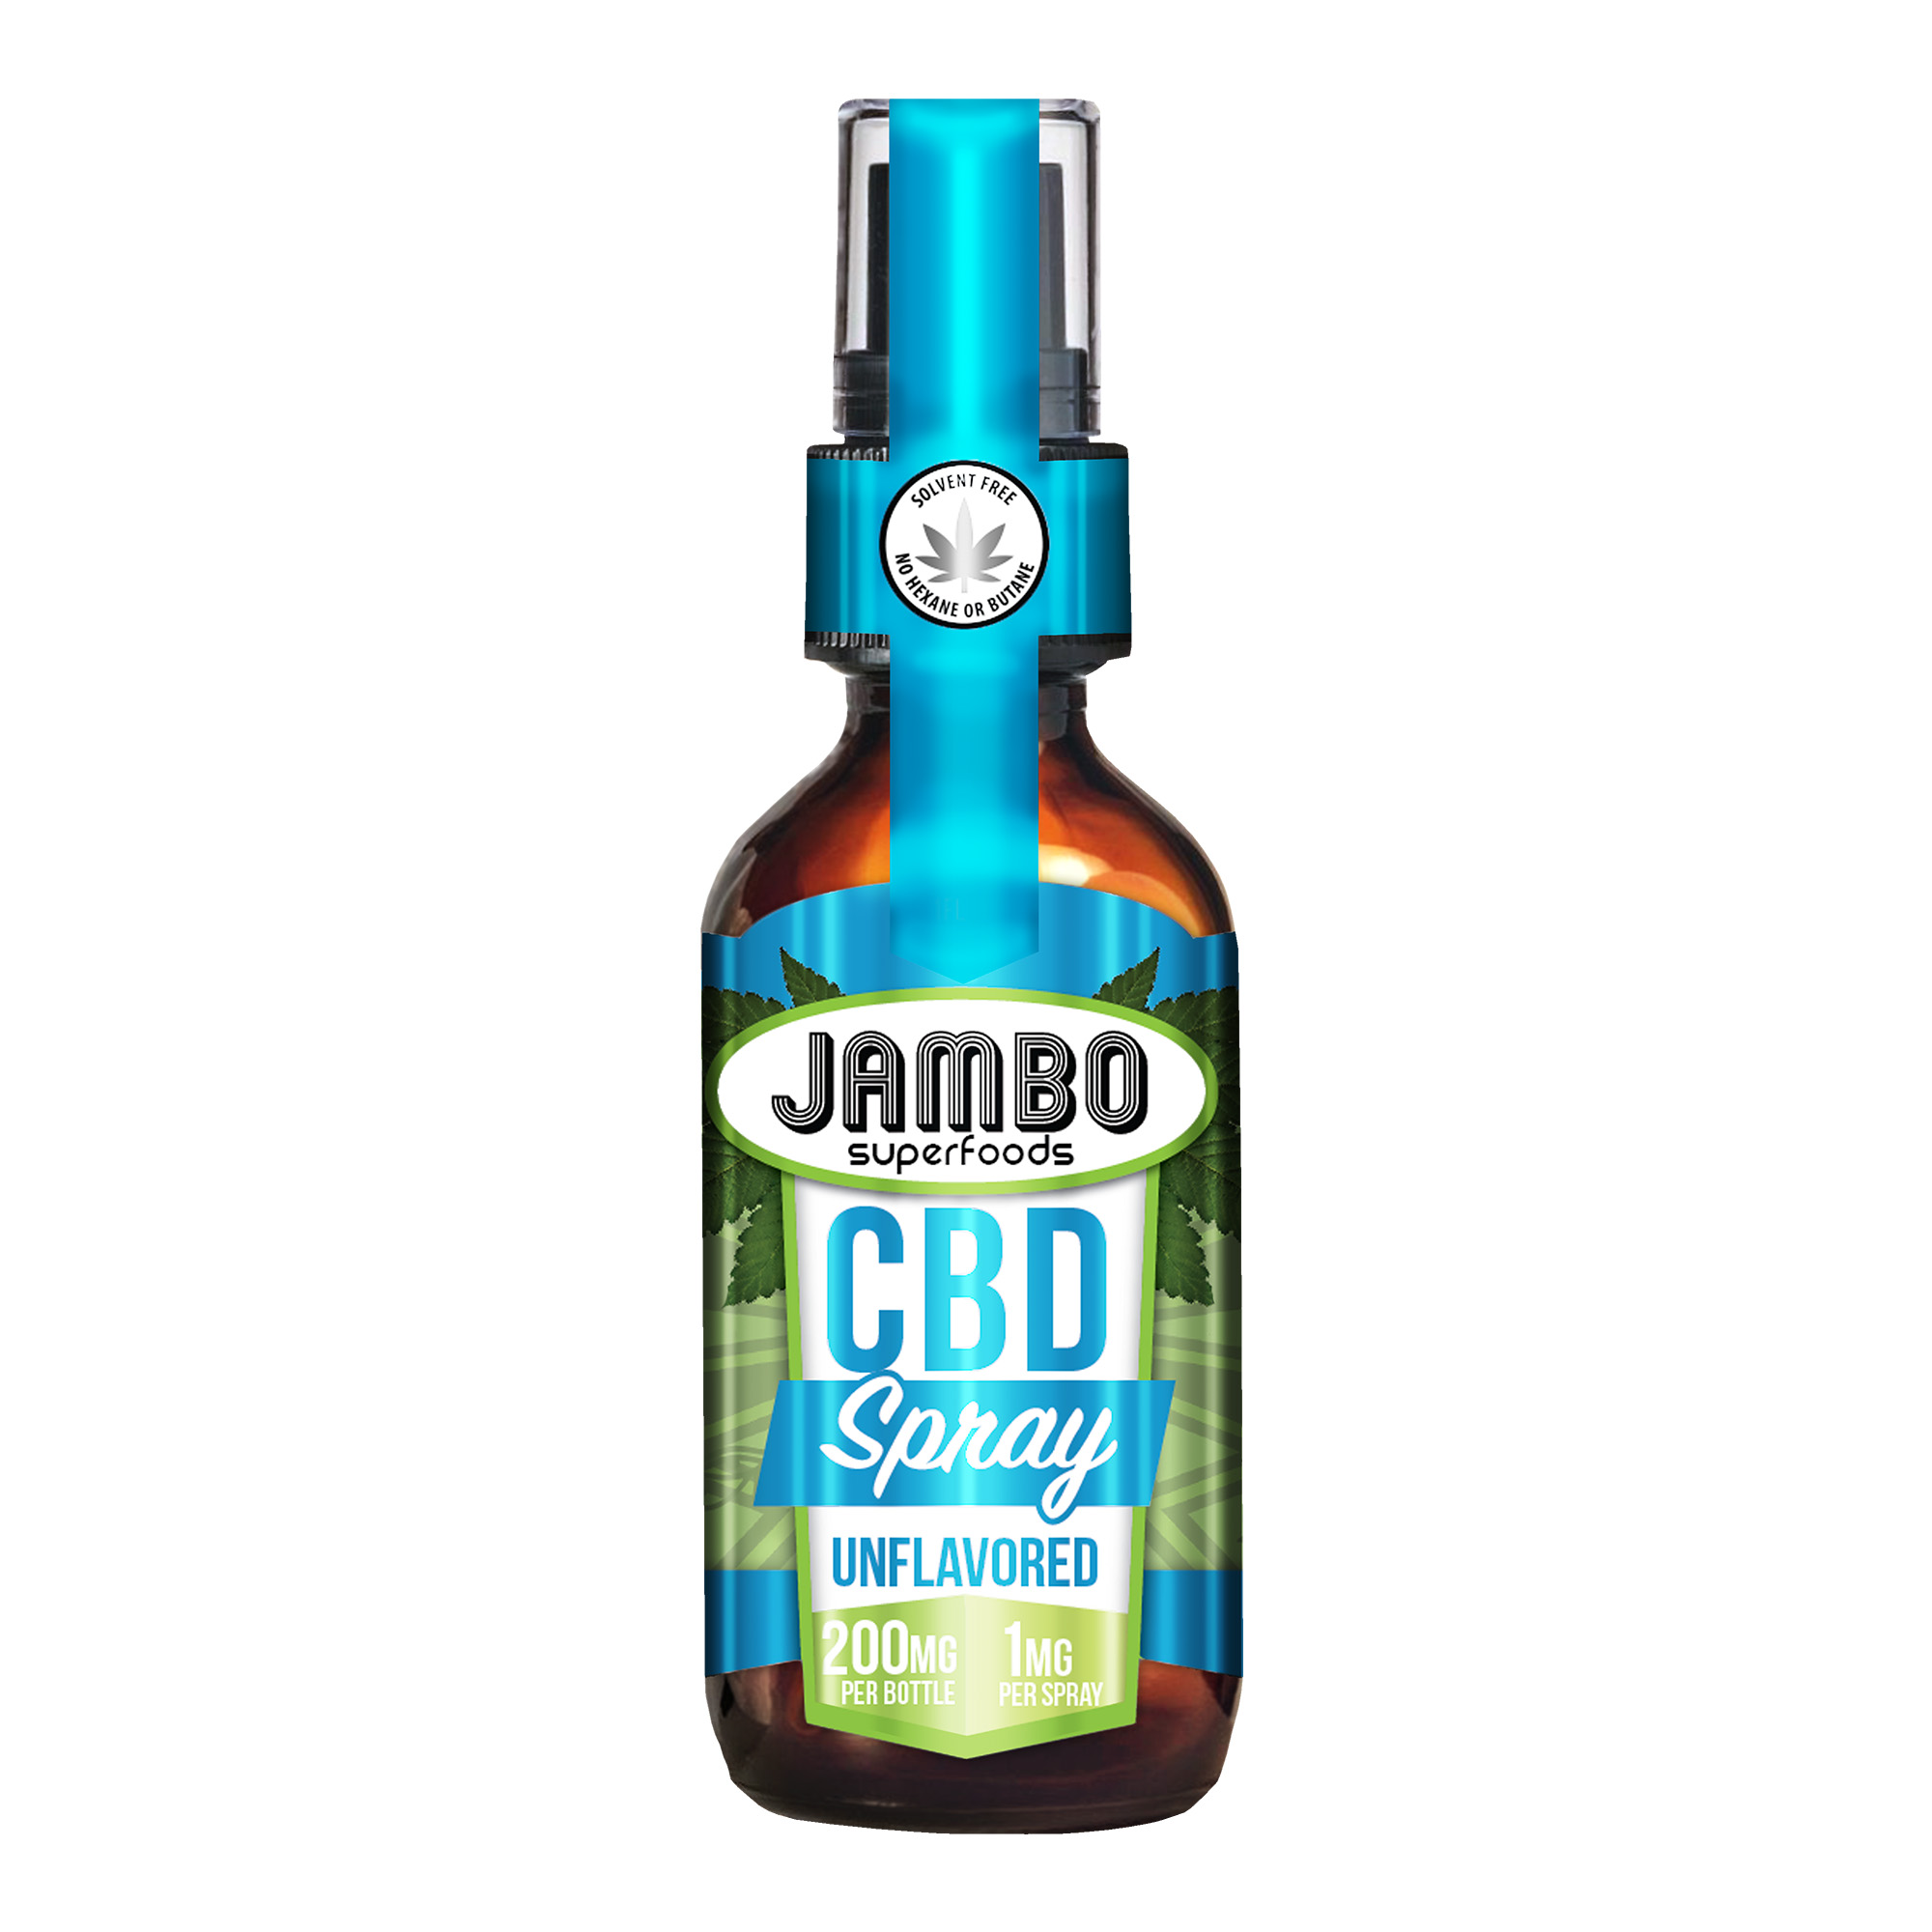 Jambo Superfoods CBD Spray unflavored 200mg product image